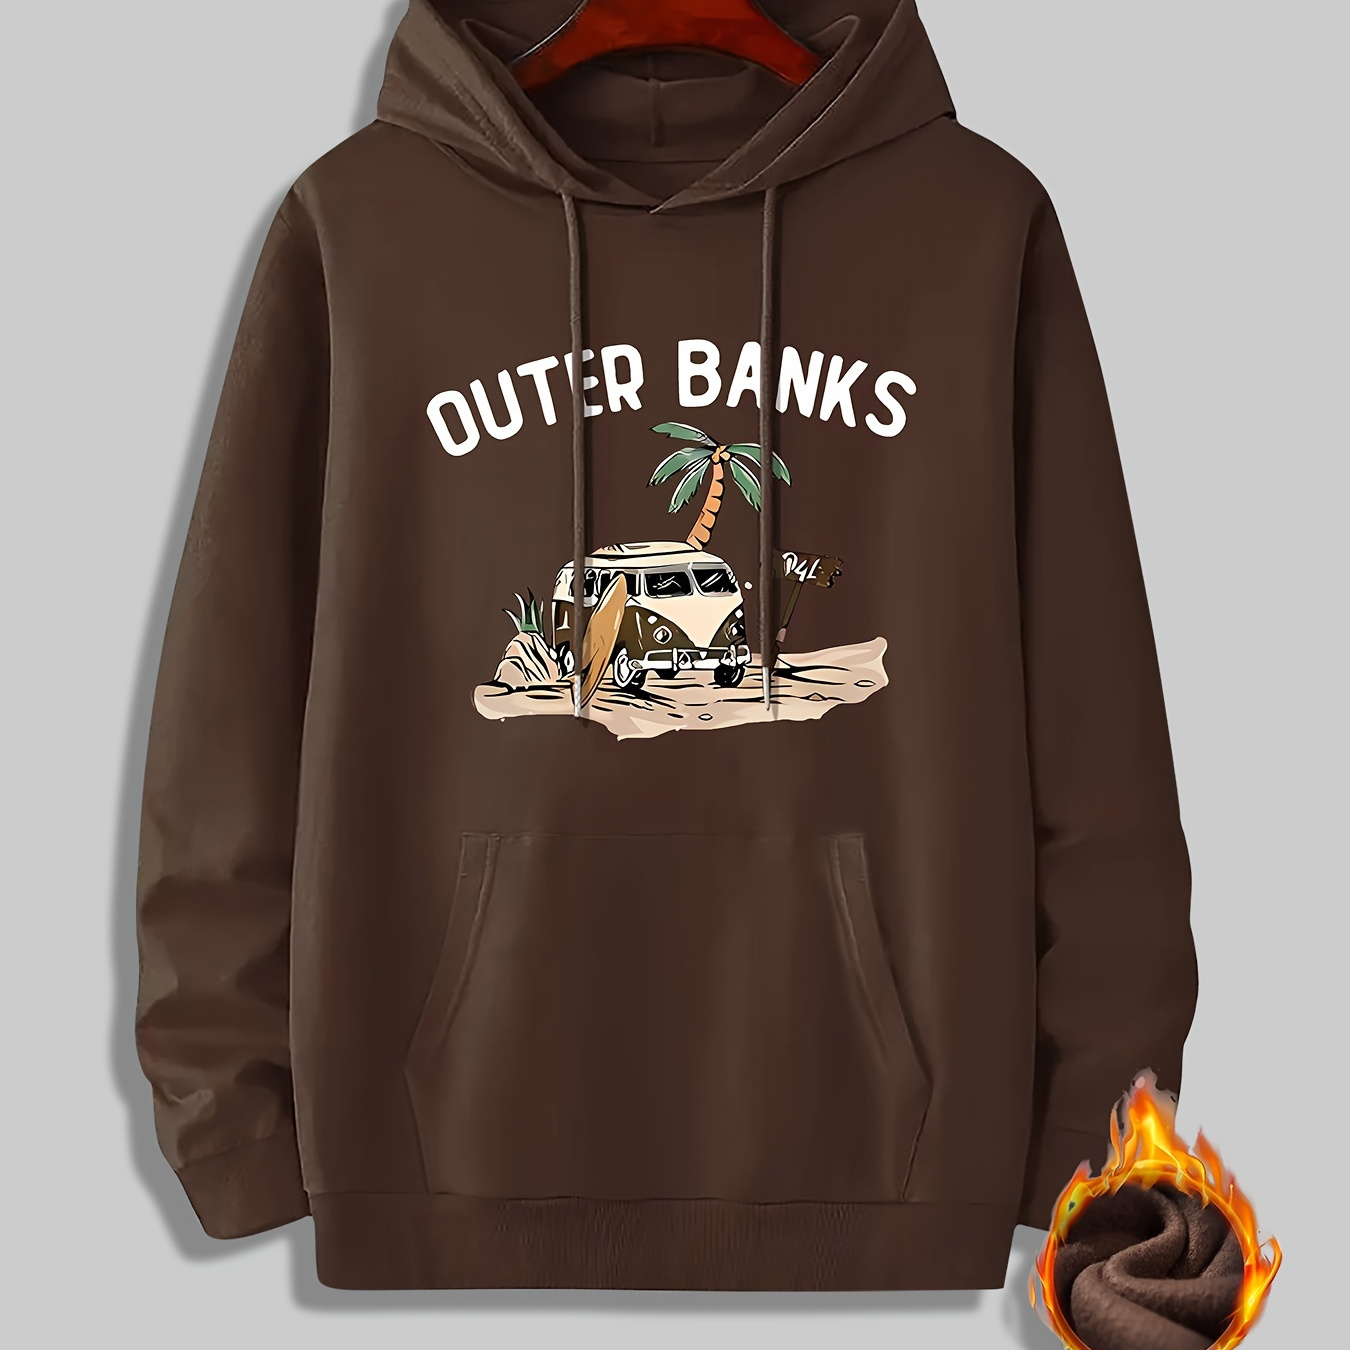 

Outer Banks Print Hoodies For Men, Graphic Hoodie With Kangaroo Pocket, Comfy Loose Trendy Hooded Pullover, Mens Clothing For Autumn Winter